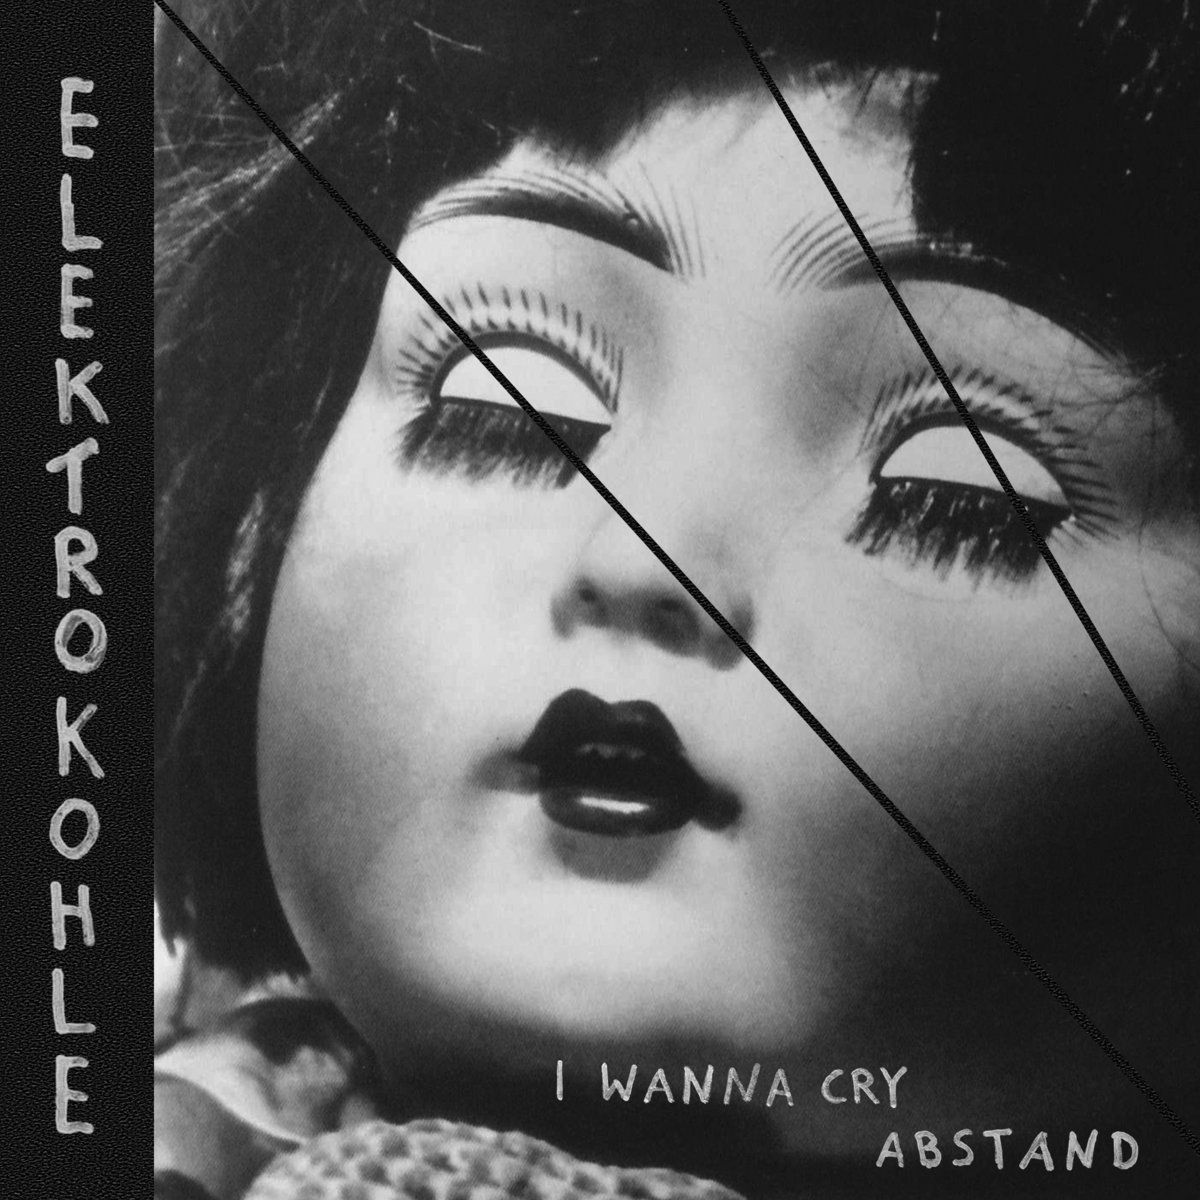 Stuck in This Life — Berlin Cold-Punk Trio Elektrokohle Debut Video for “I Wanna Cry”